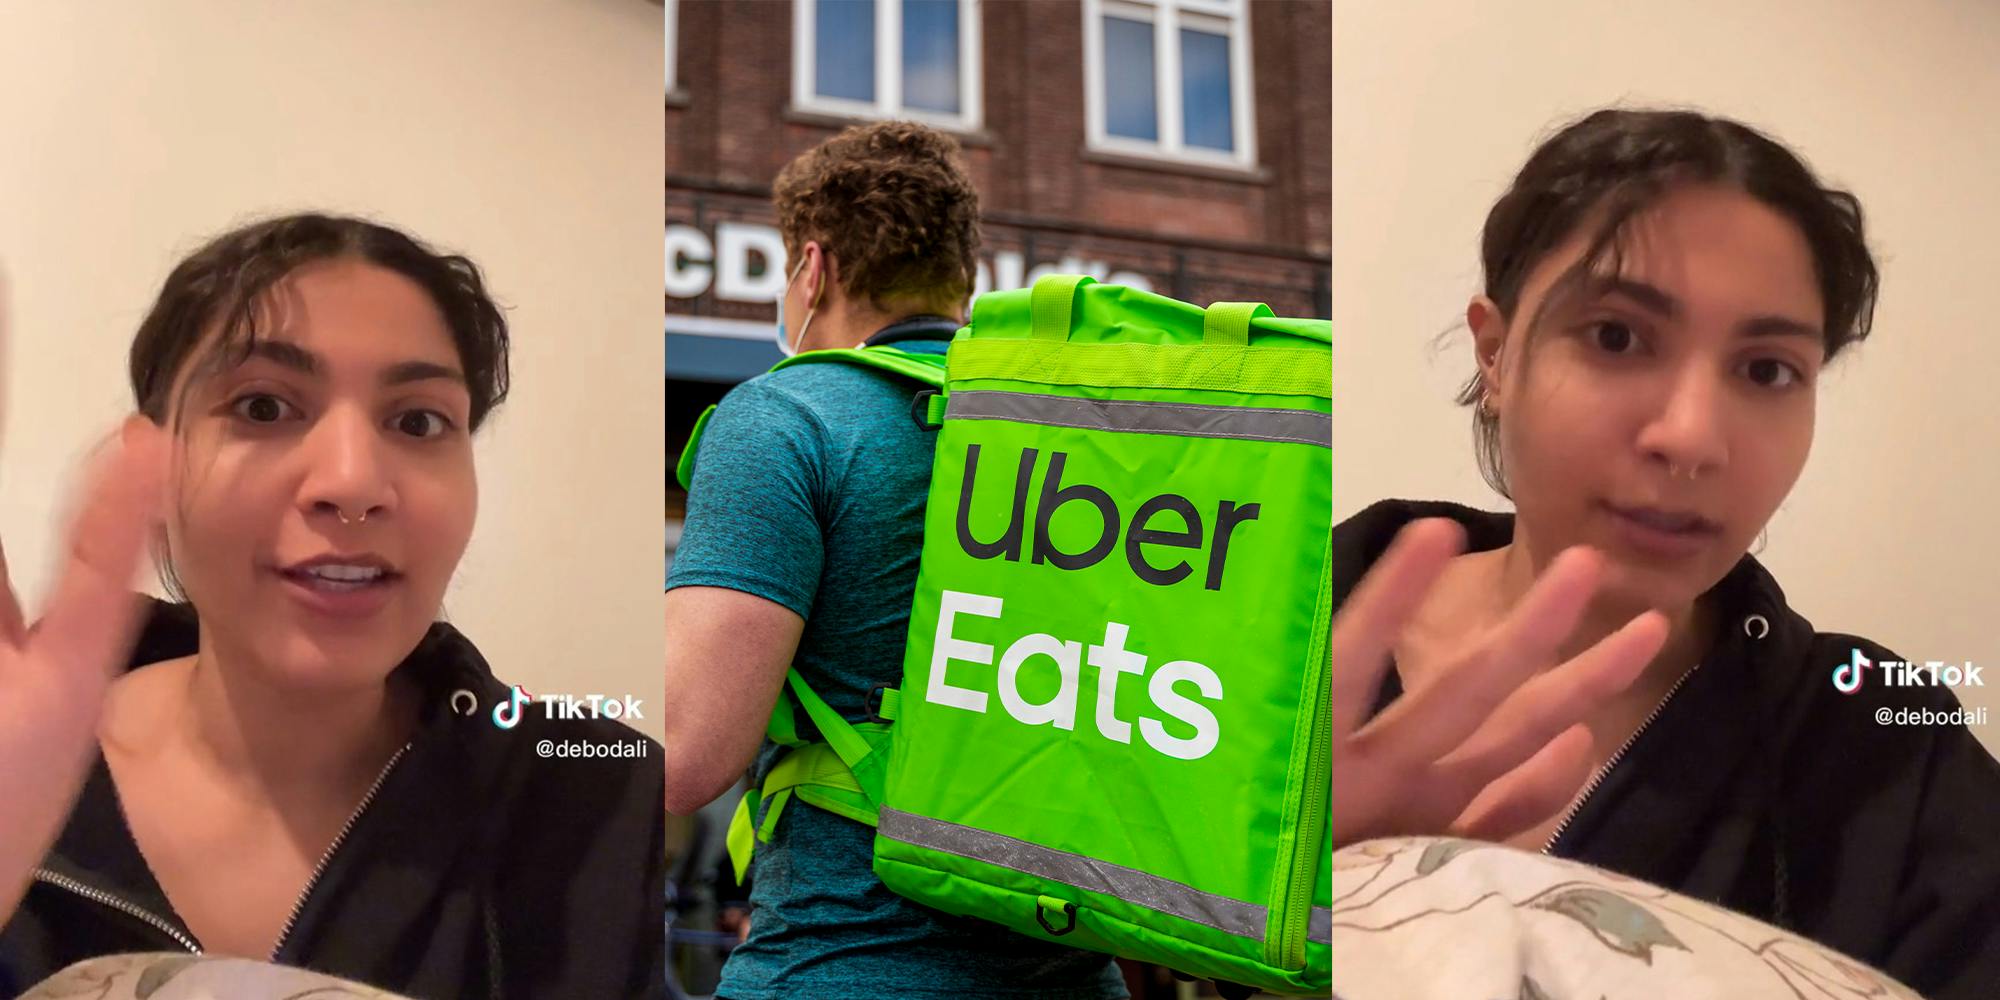 Woman Explains the issues with UberEats